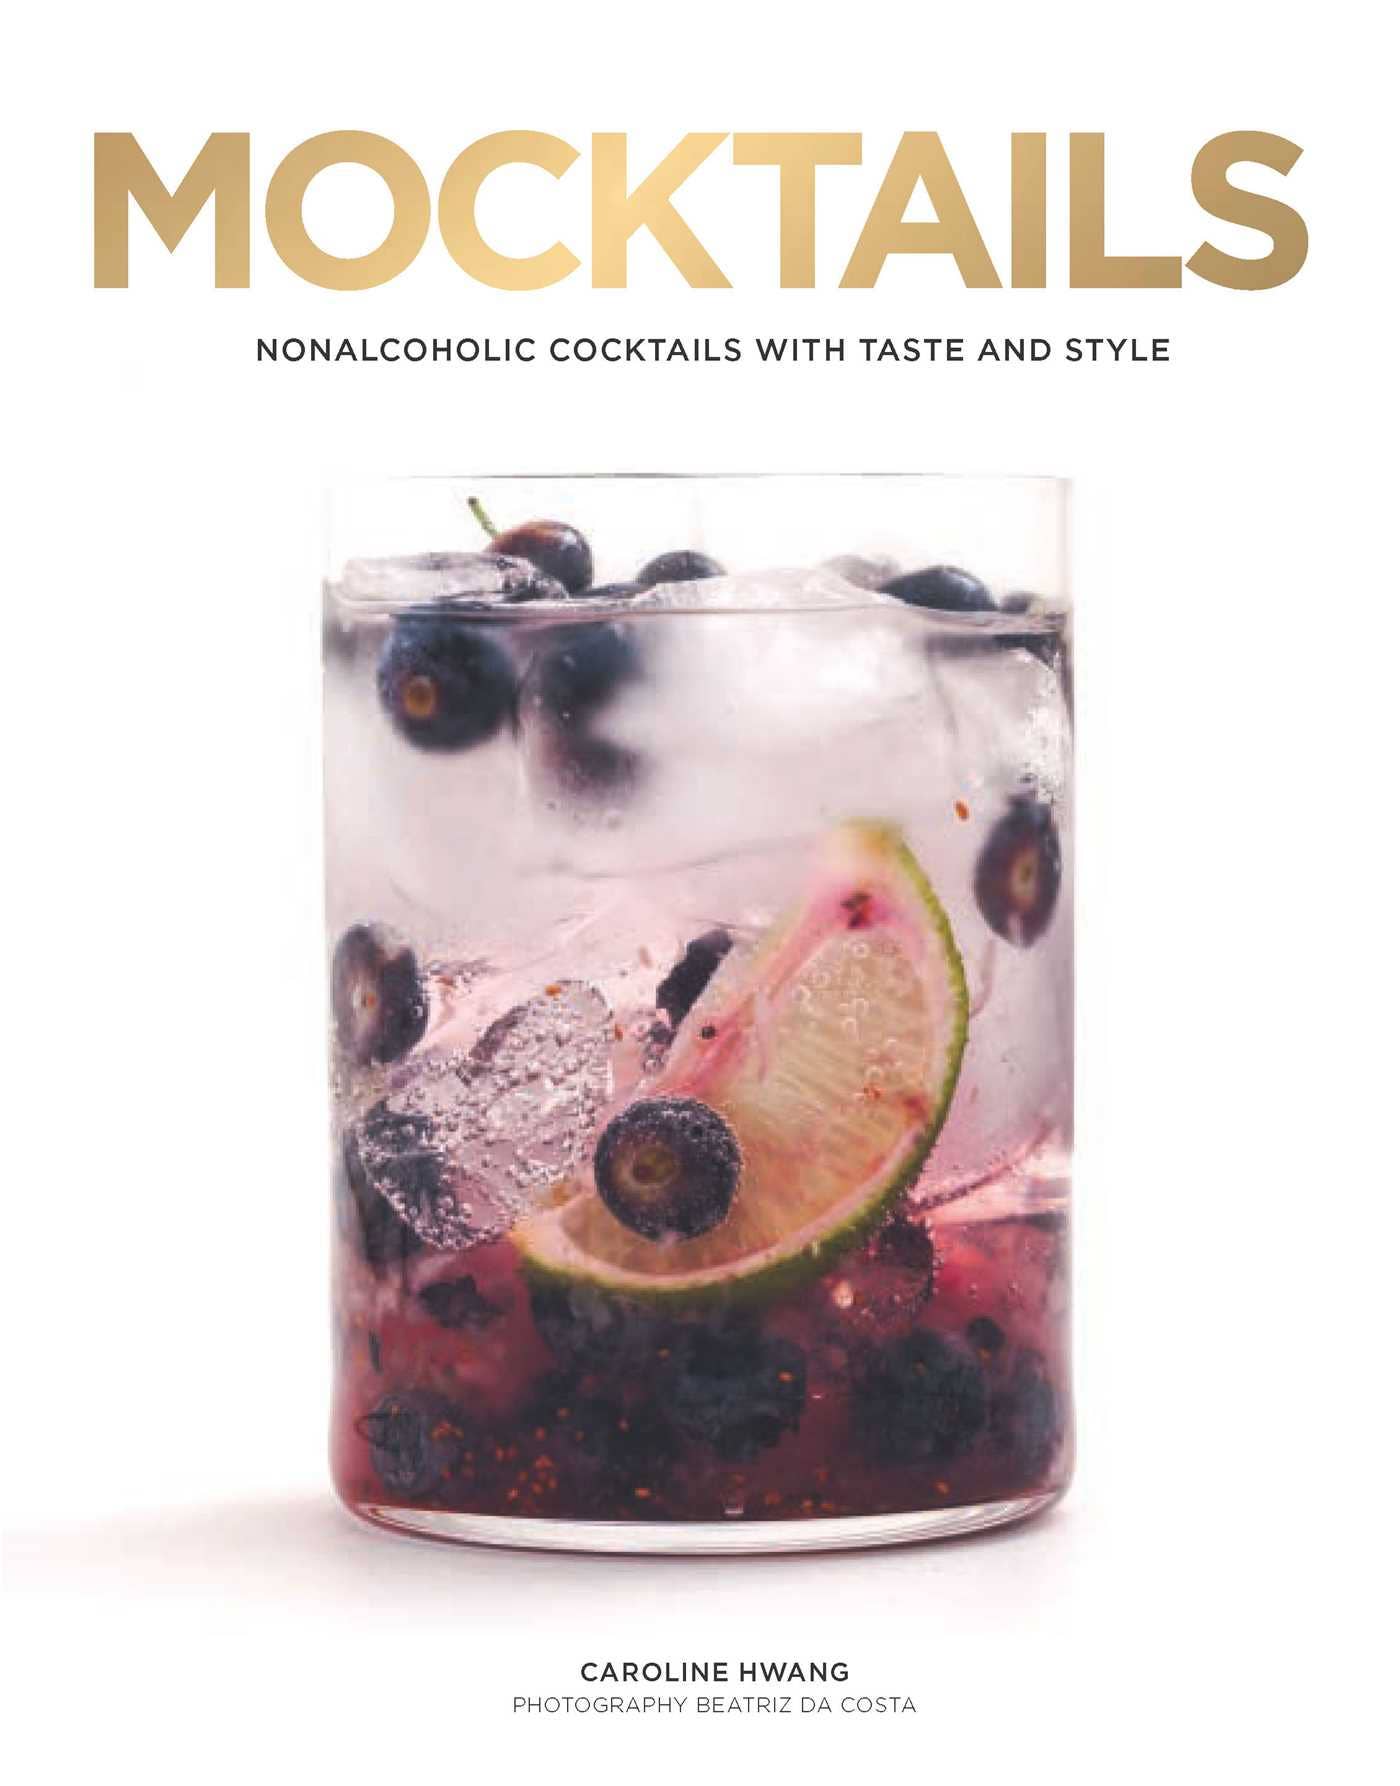 Mocktails: Nonalcoholic Cocktails with Taste and Style